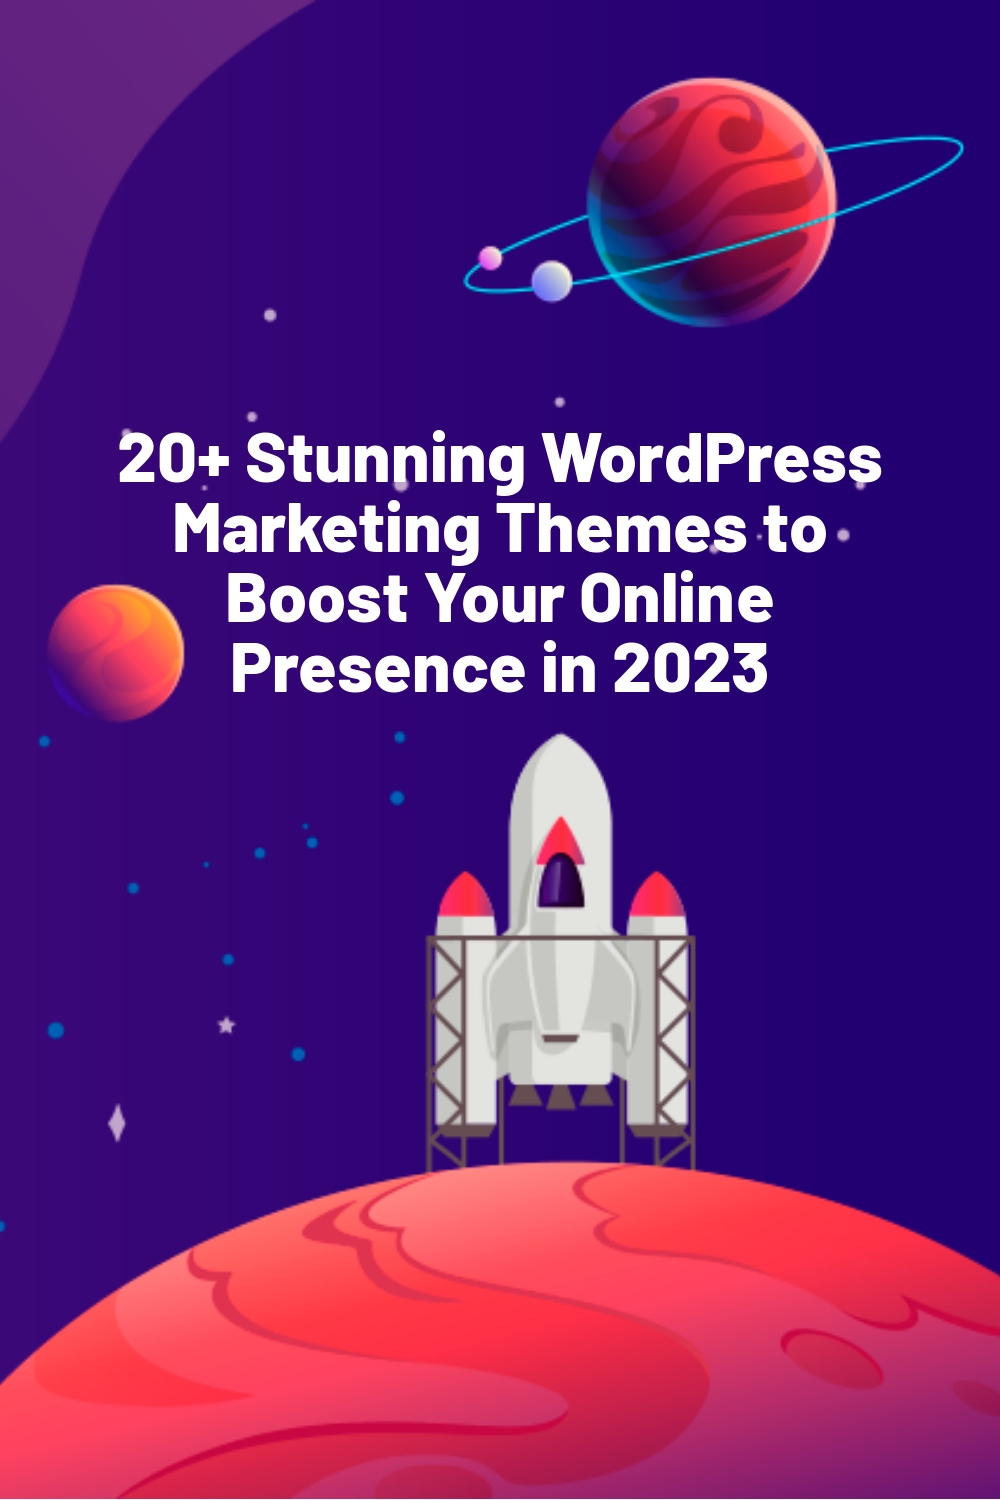 20+ Stunning WordPress Marketing Themes to Boost Your Online Presence in 2023